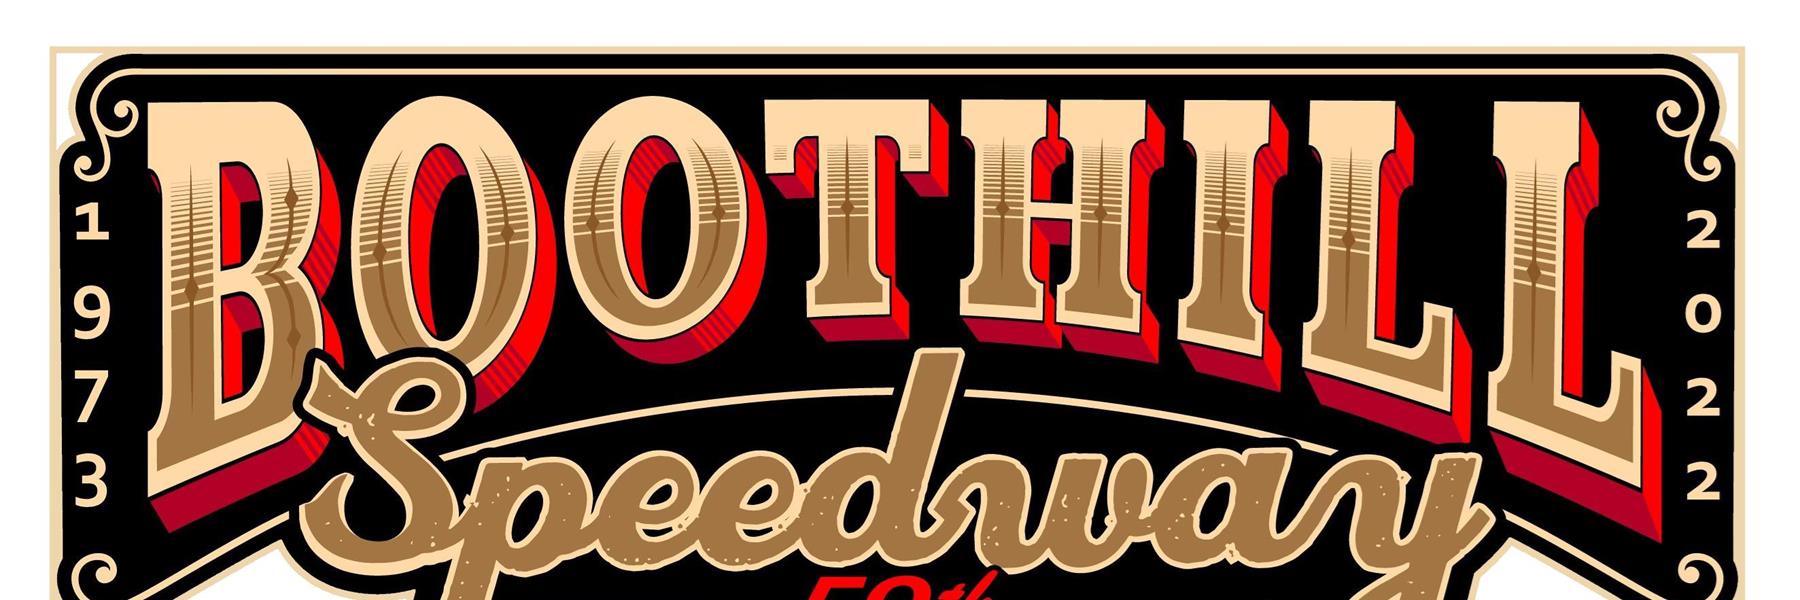 3/18/2023 - Boothill Speedway